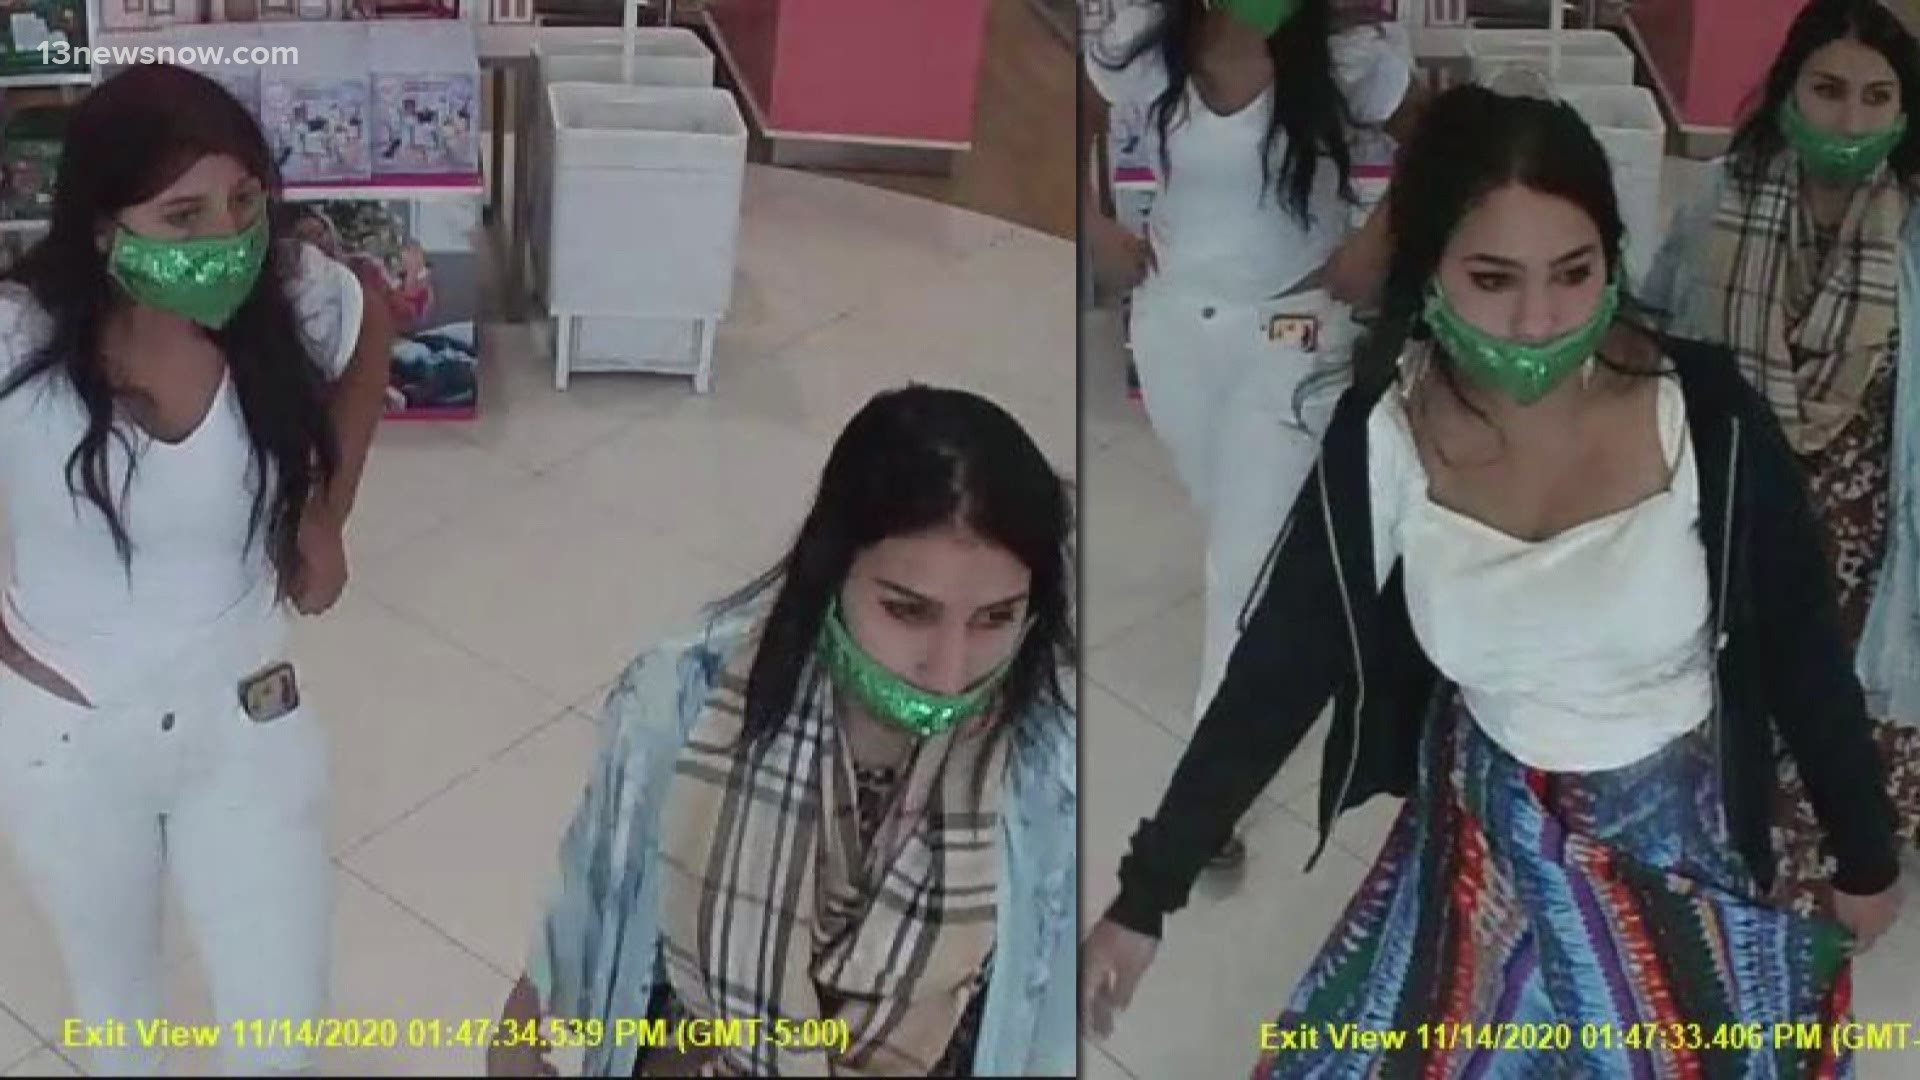 Police say the women were seen on surveillance video working together to hide different items before leaving the store without paying.